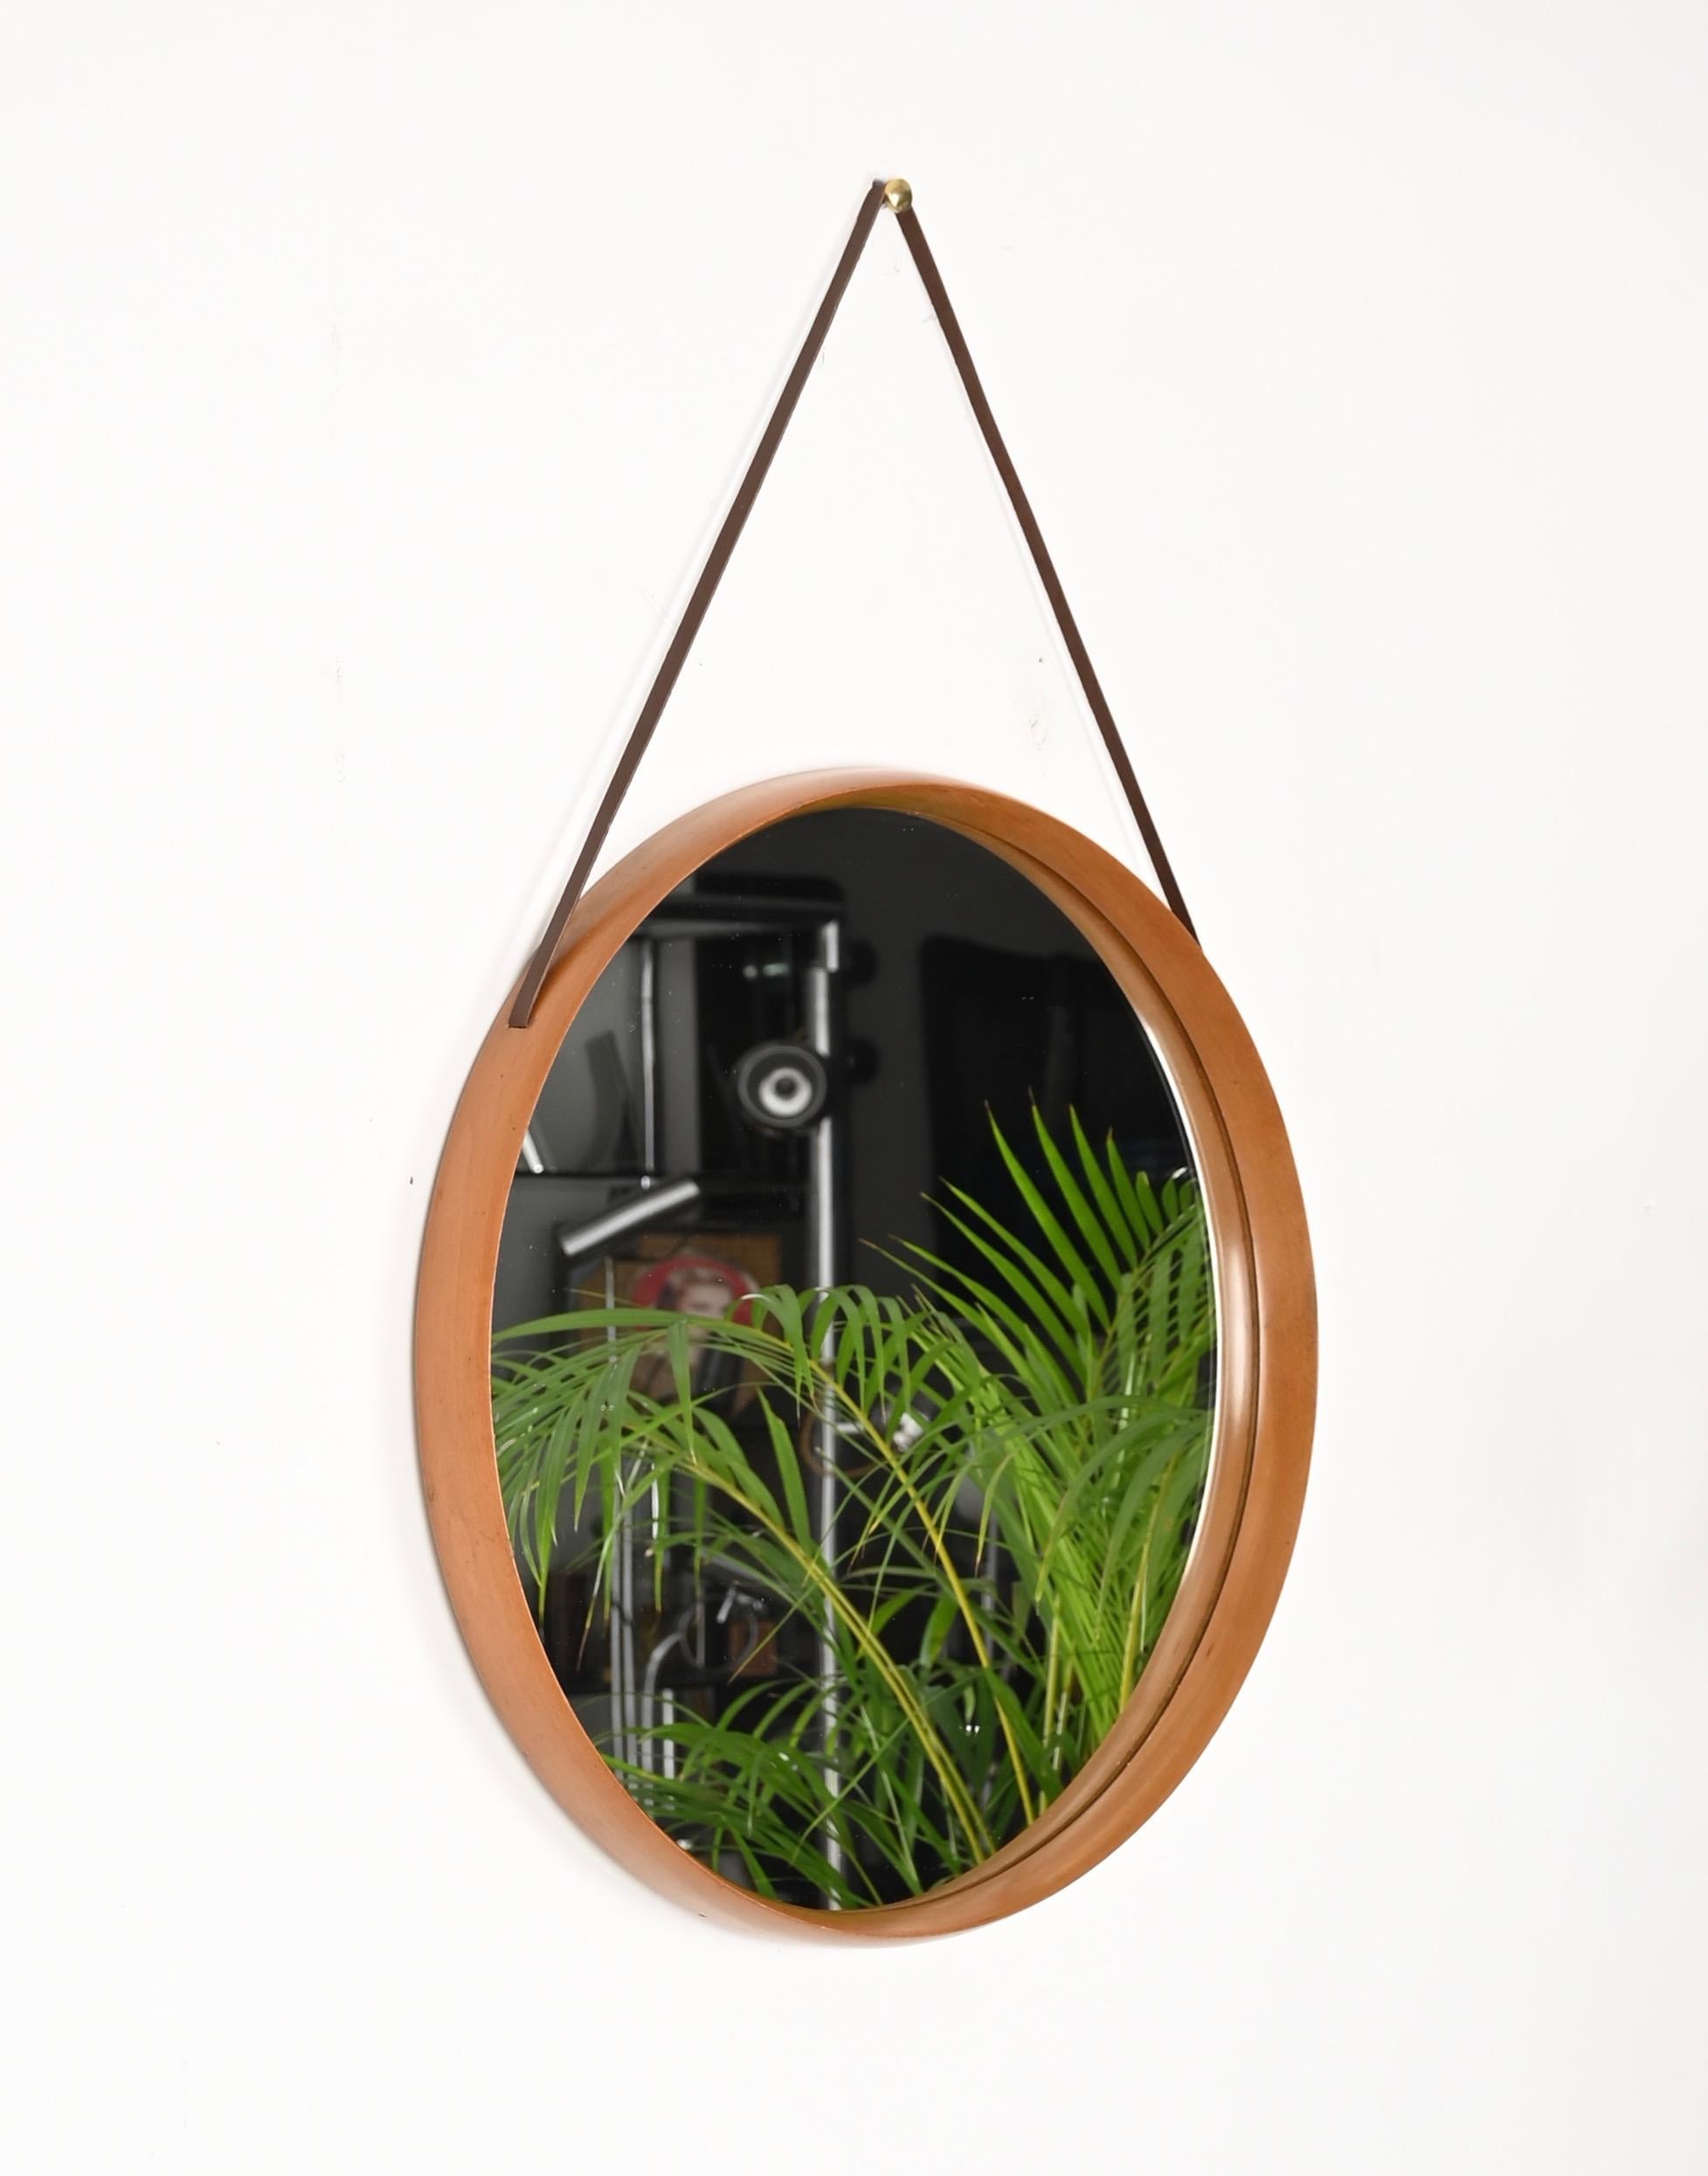 Amazing mid-Century round mirror made in solid walnut with a leather cord. This charming mirror was designed by Stildomus in Italy during the 1960s. 

The frame of the mirror is made in a lovely blonde walnut that pairs amazingly with the darker